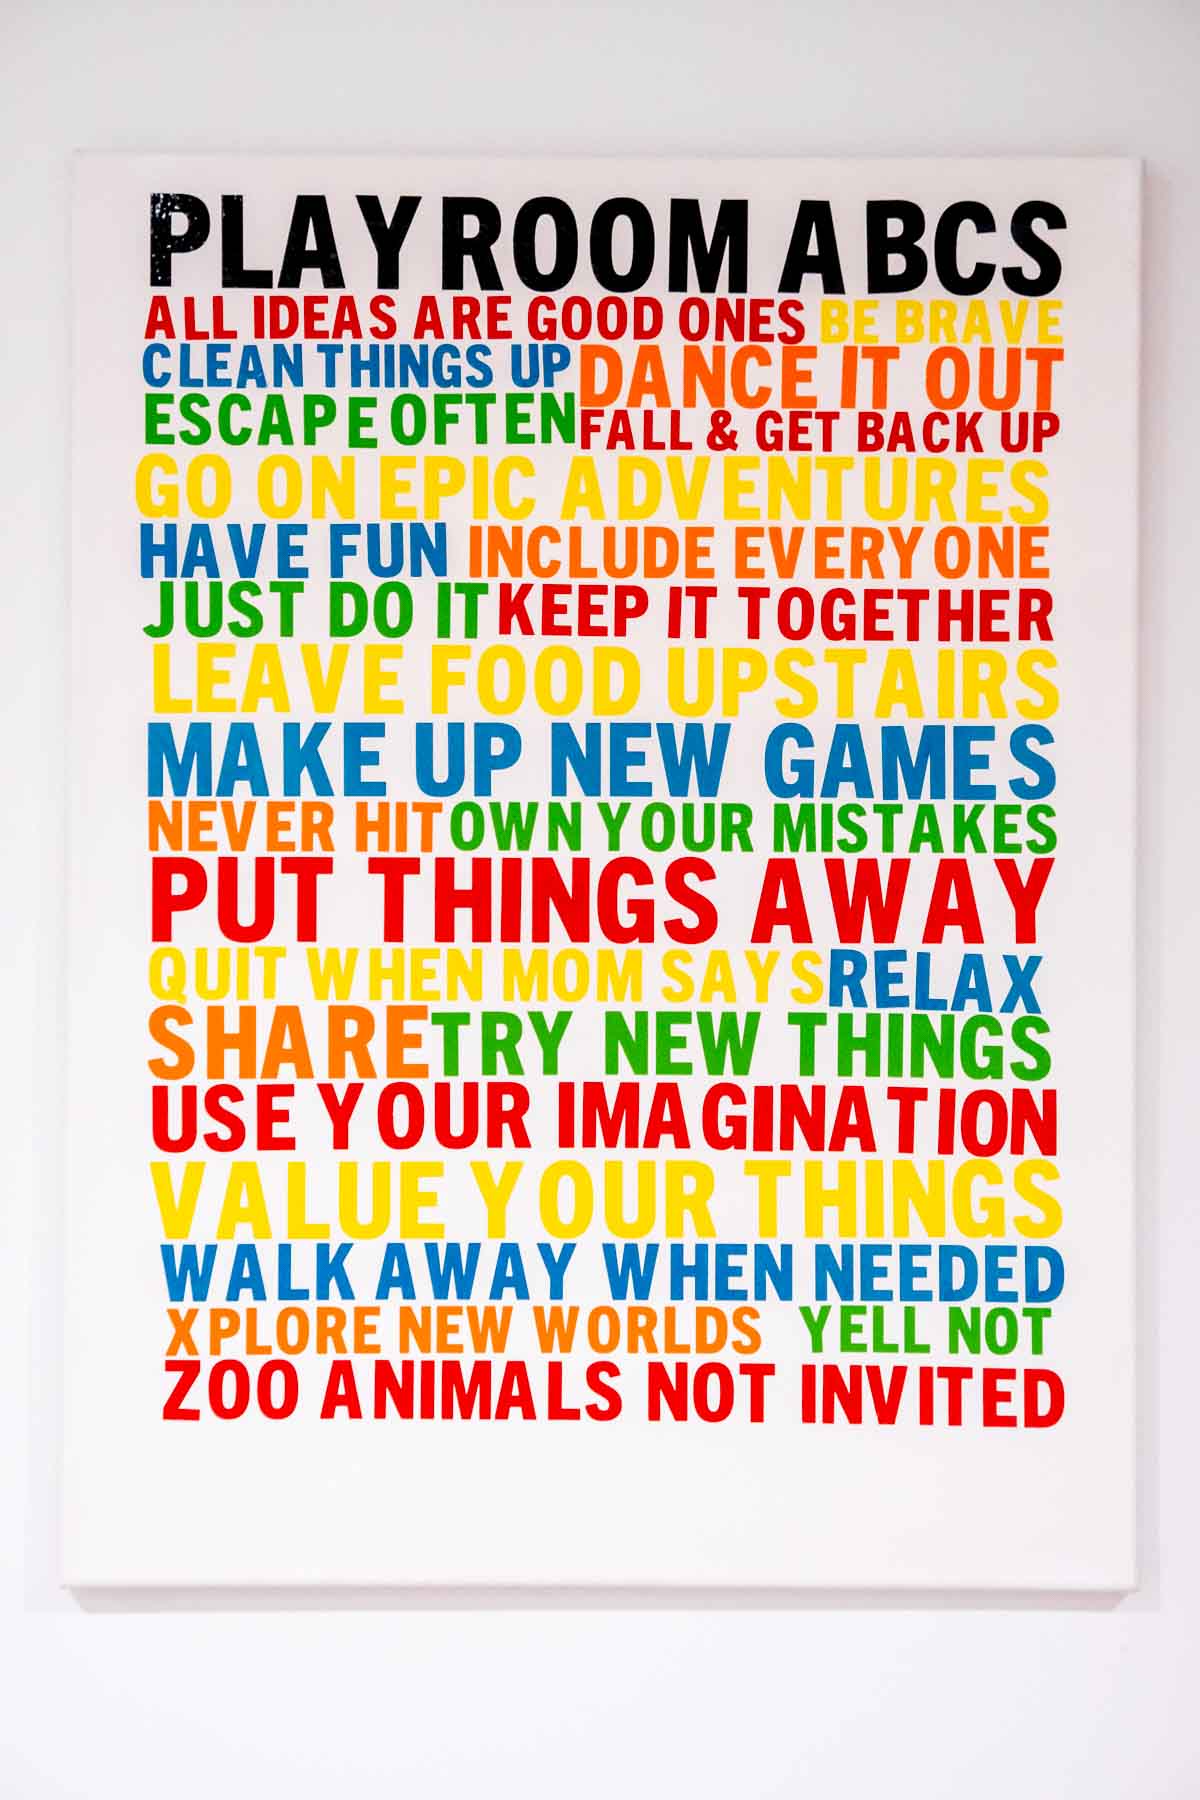 sign for a modern playroom